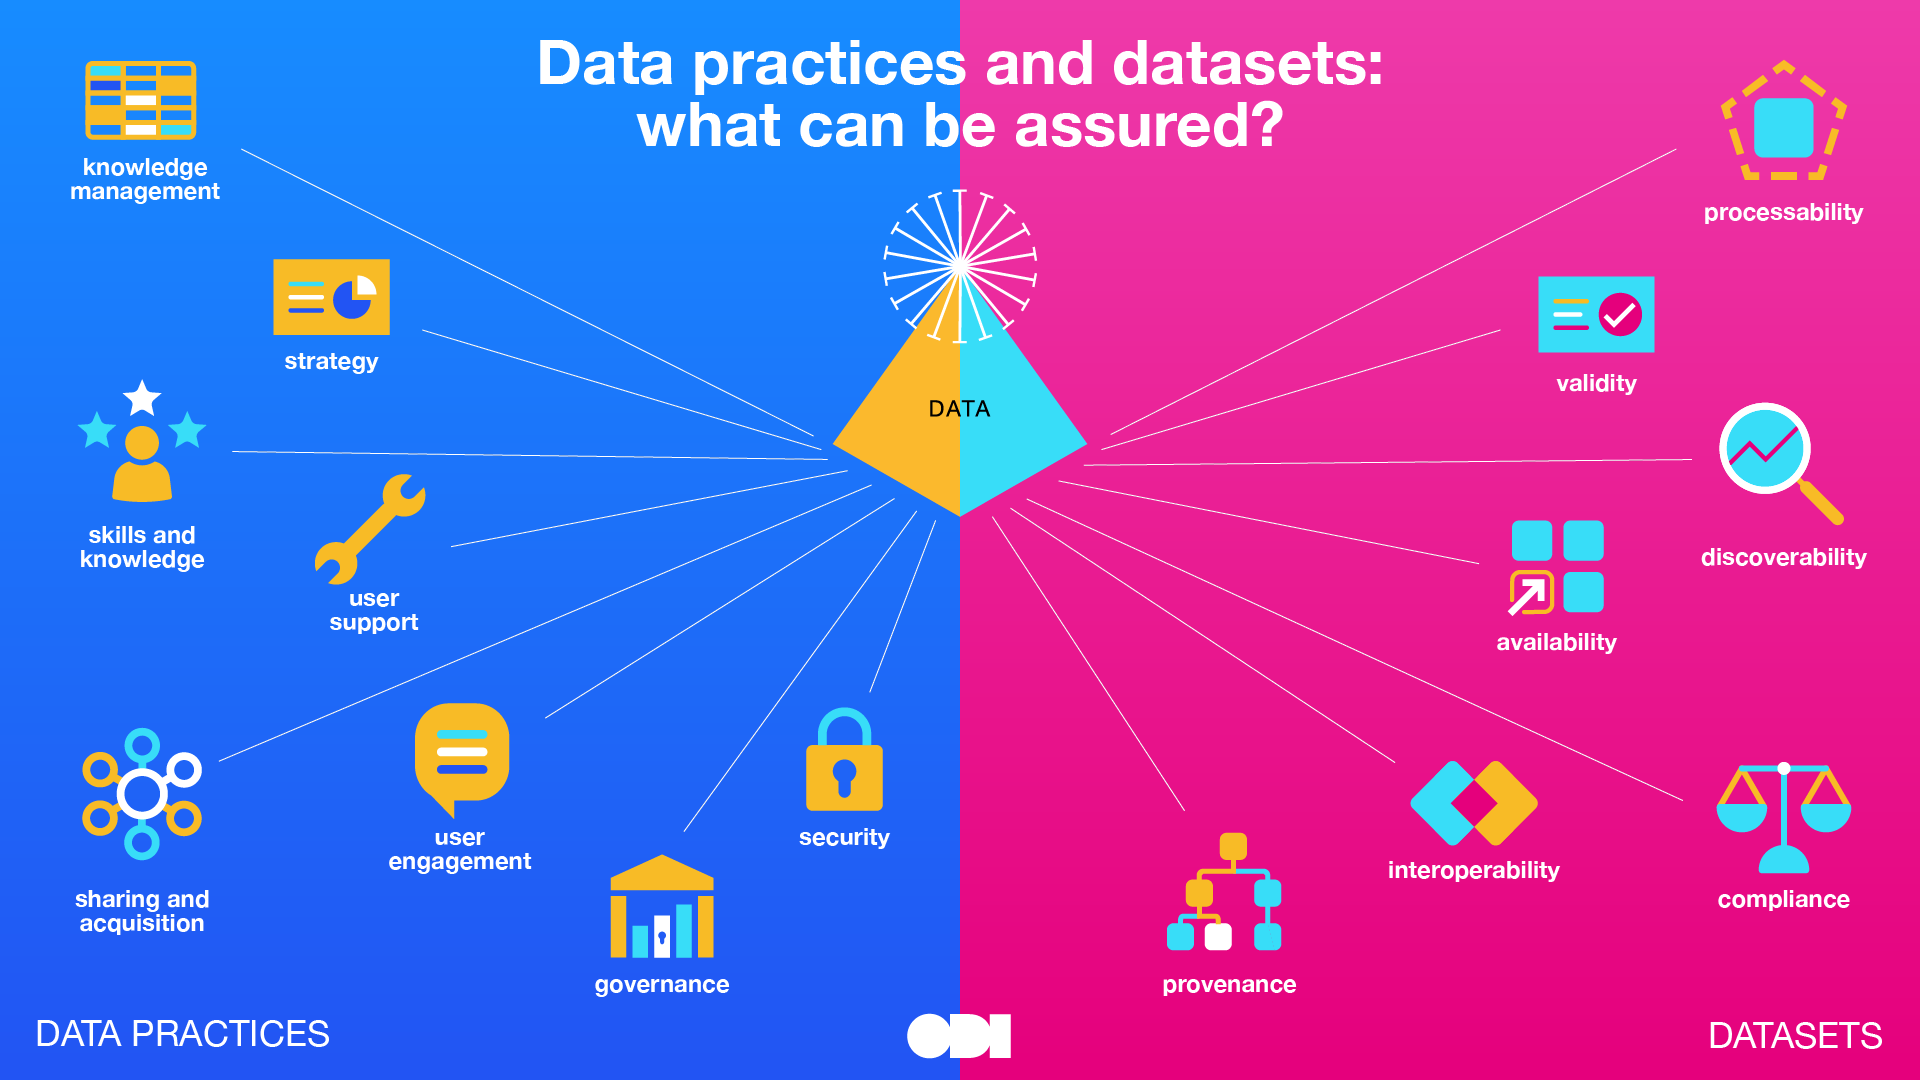 Data practices and datasets: what can be assured? Data practices: knowledge management, strategy, skills and knowledge, user support, sharing and acquisition, user engagement, governance, security. Datasets: processability, validity, discoverability, avai